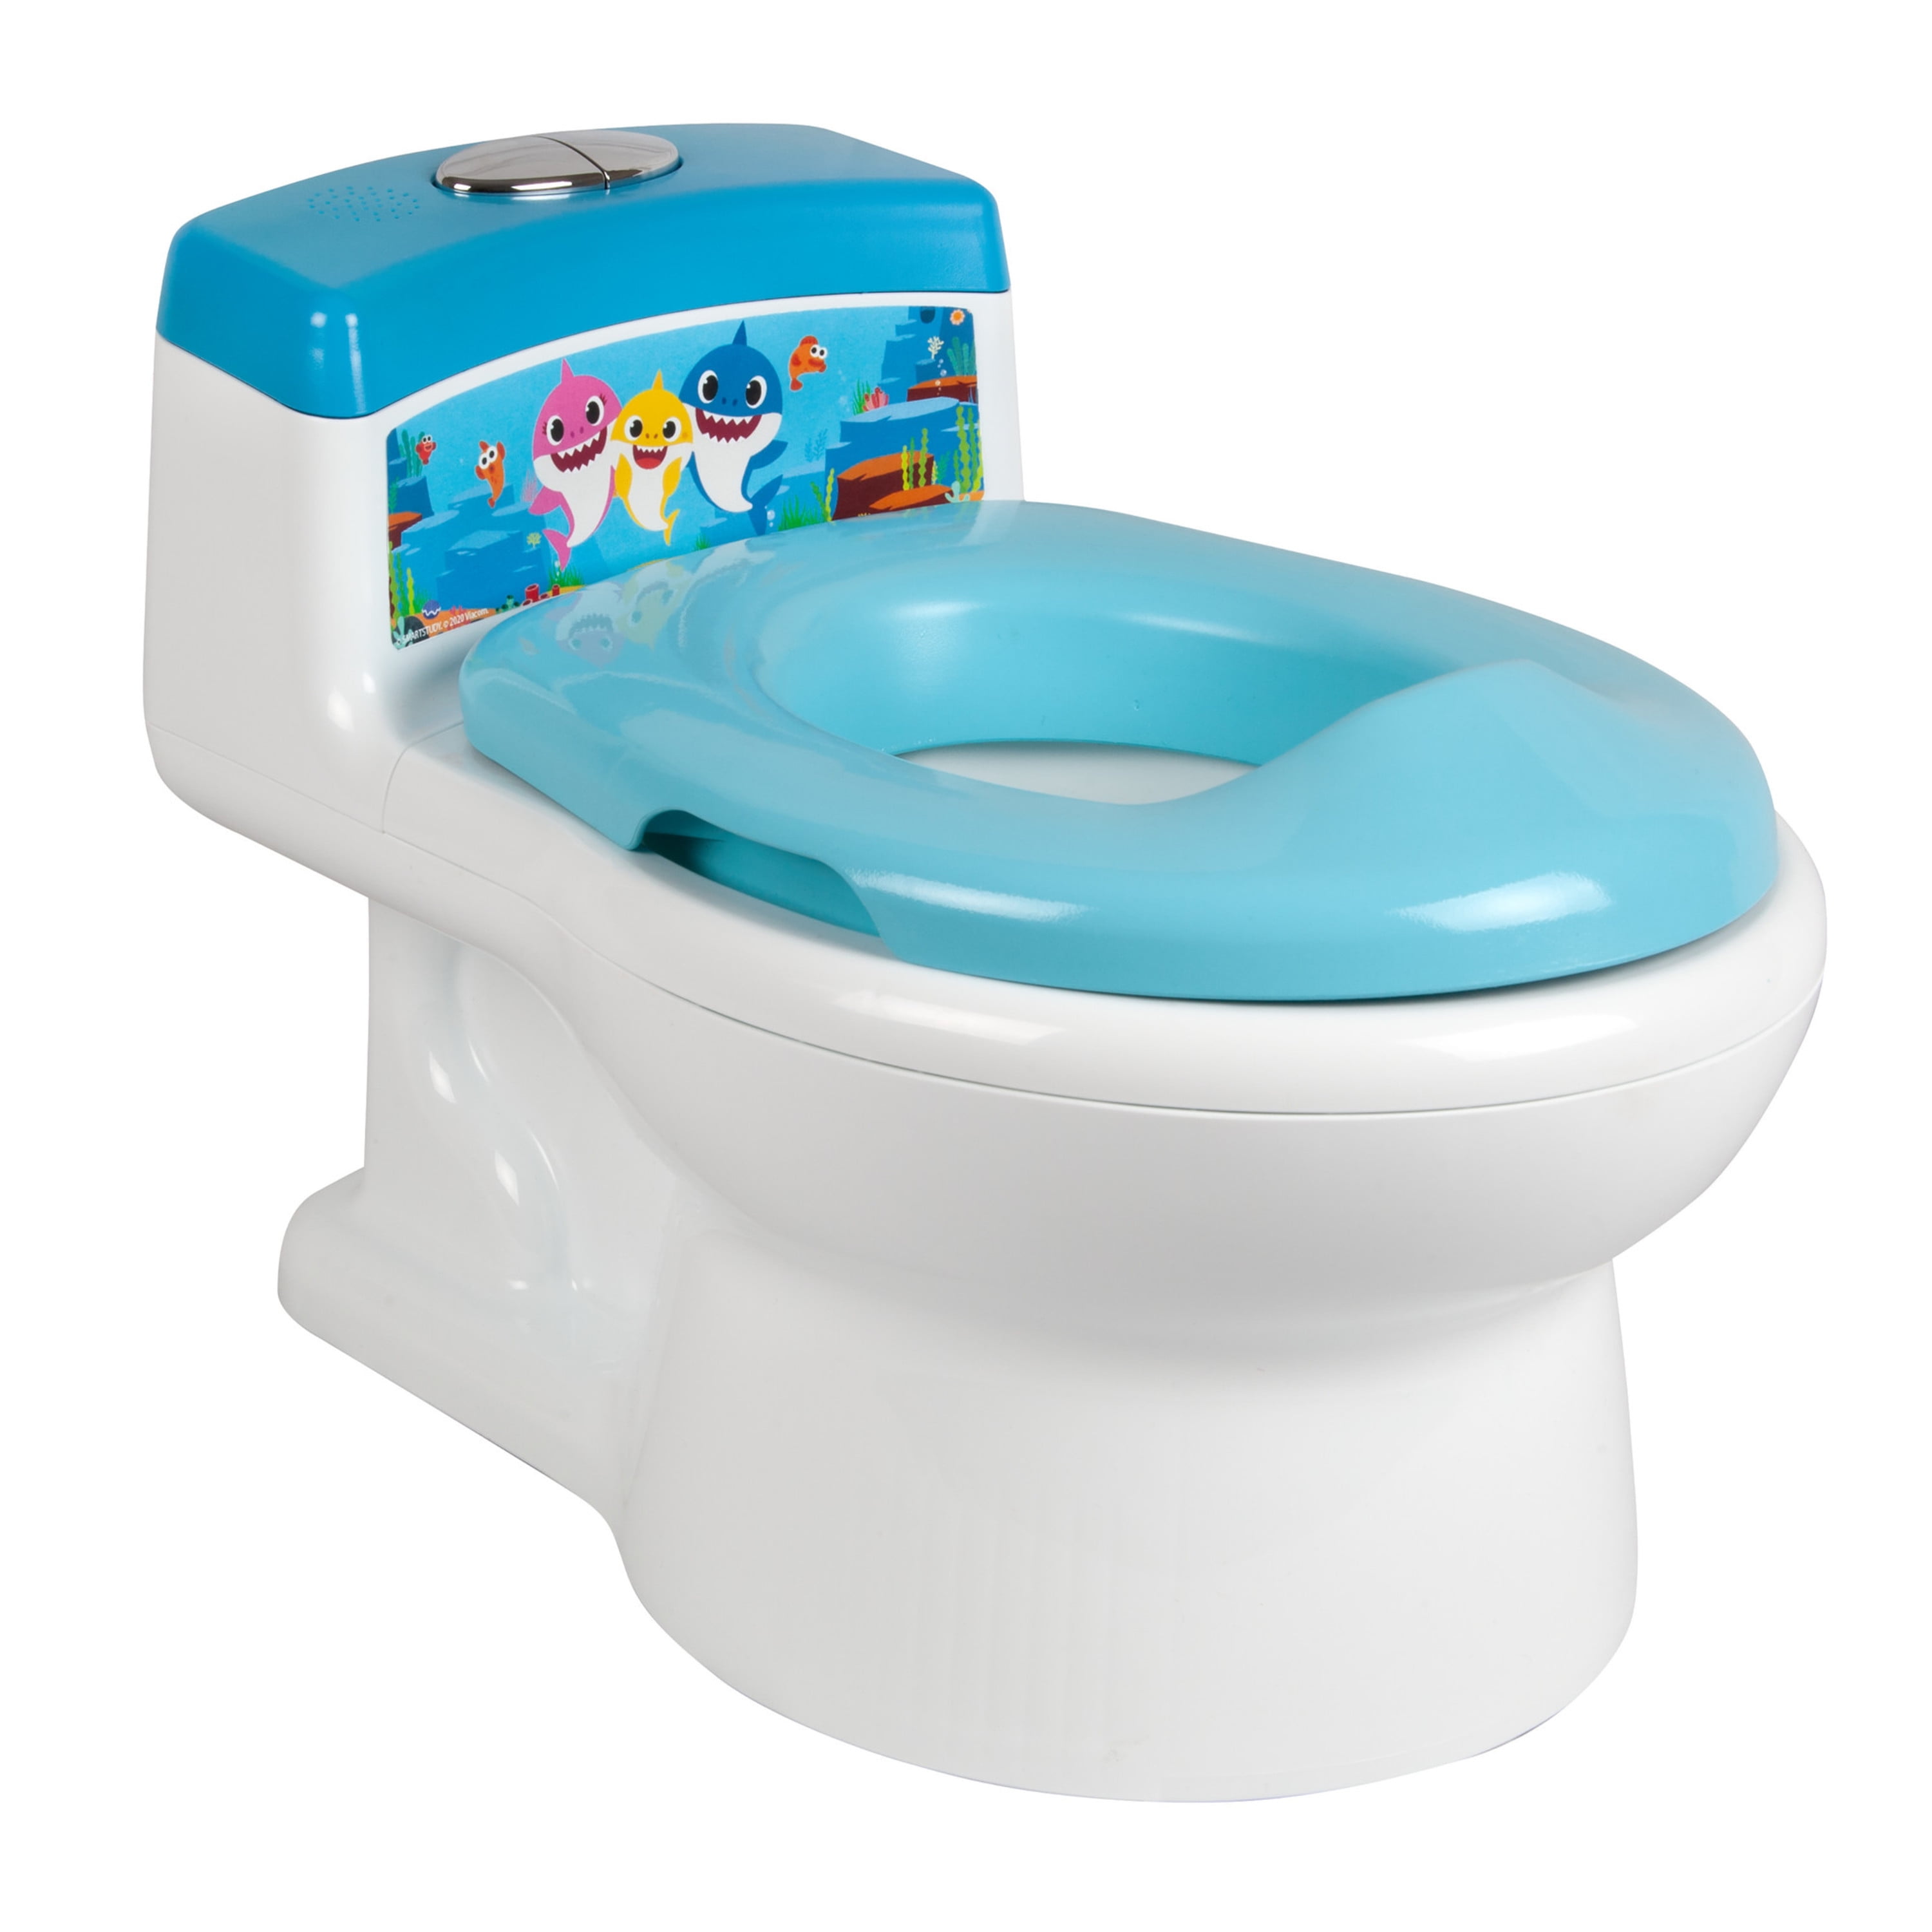 KIDS POTTY CHAIR SEAT BABY TODDLER TRAINING CHILDREN REMOVABLE TOILET SEAT PRO U 